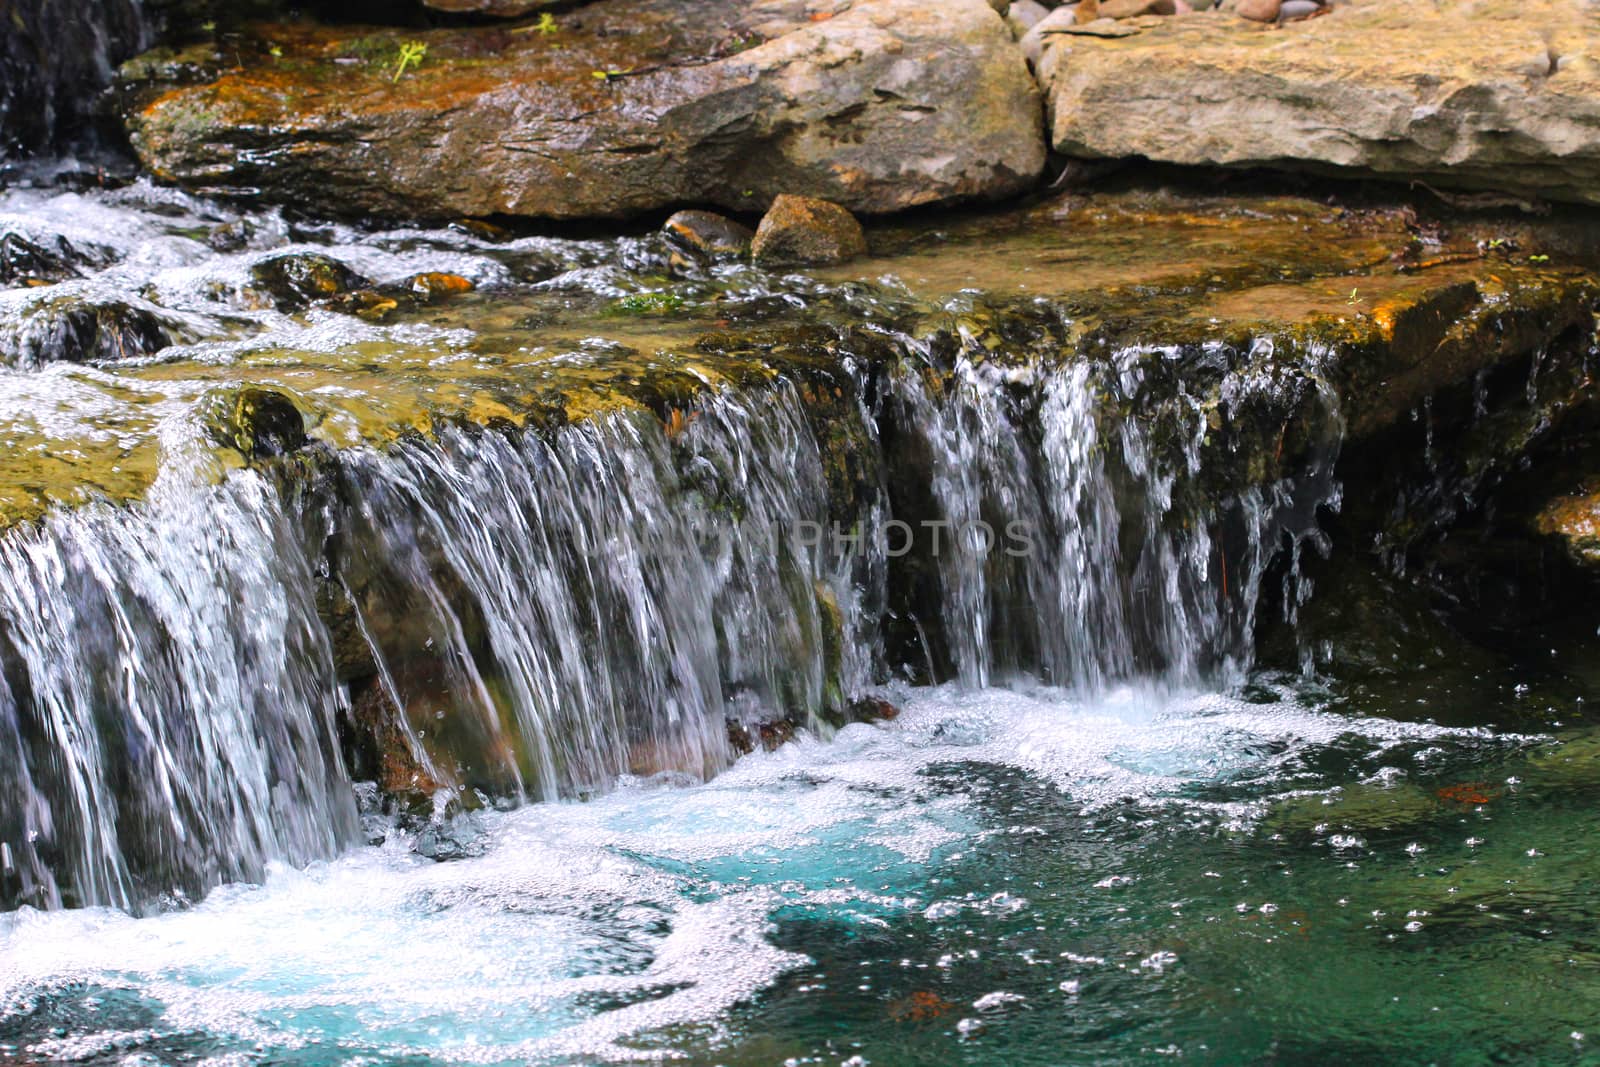 A garden pond supports a multi-tiered waterfall with many layers of rock slabs.